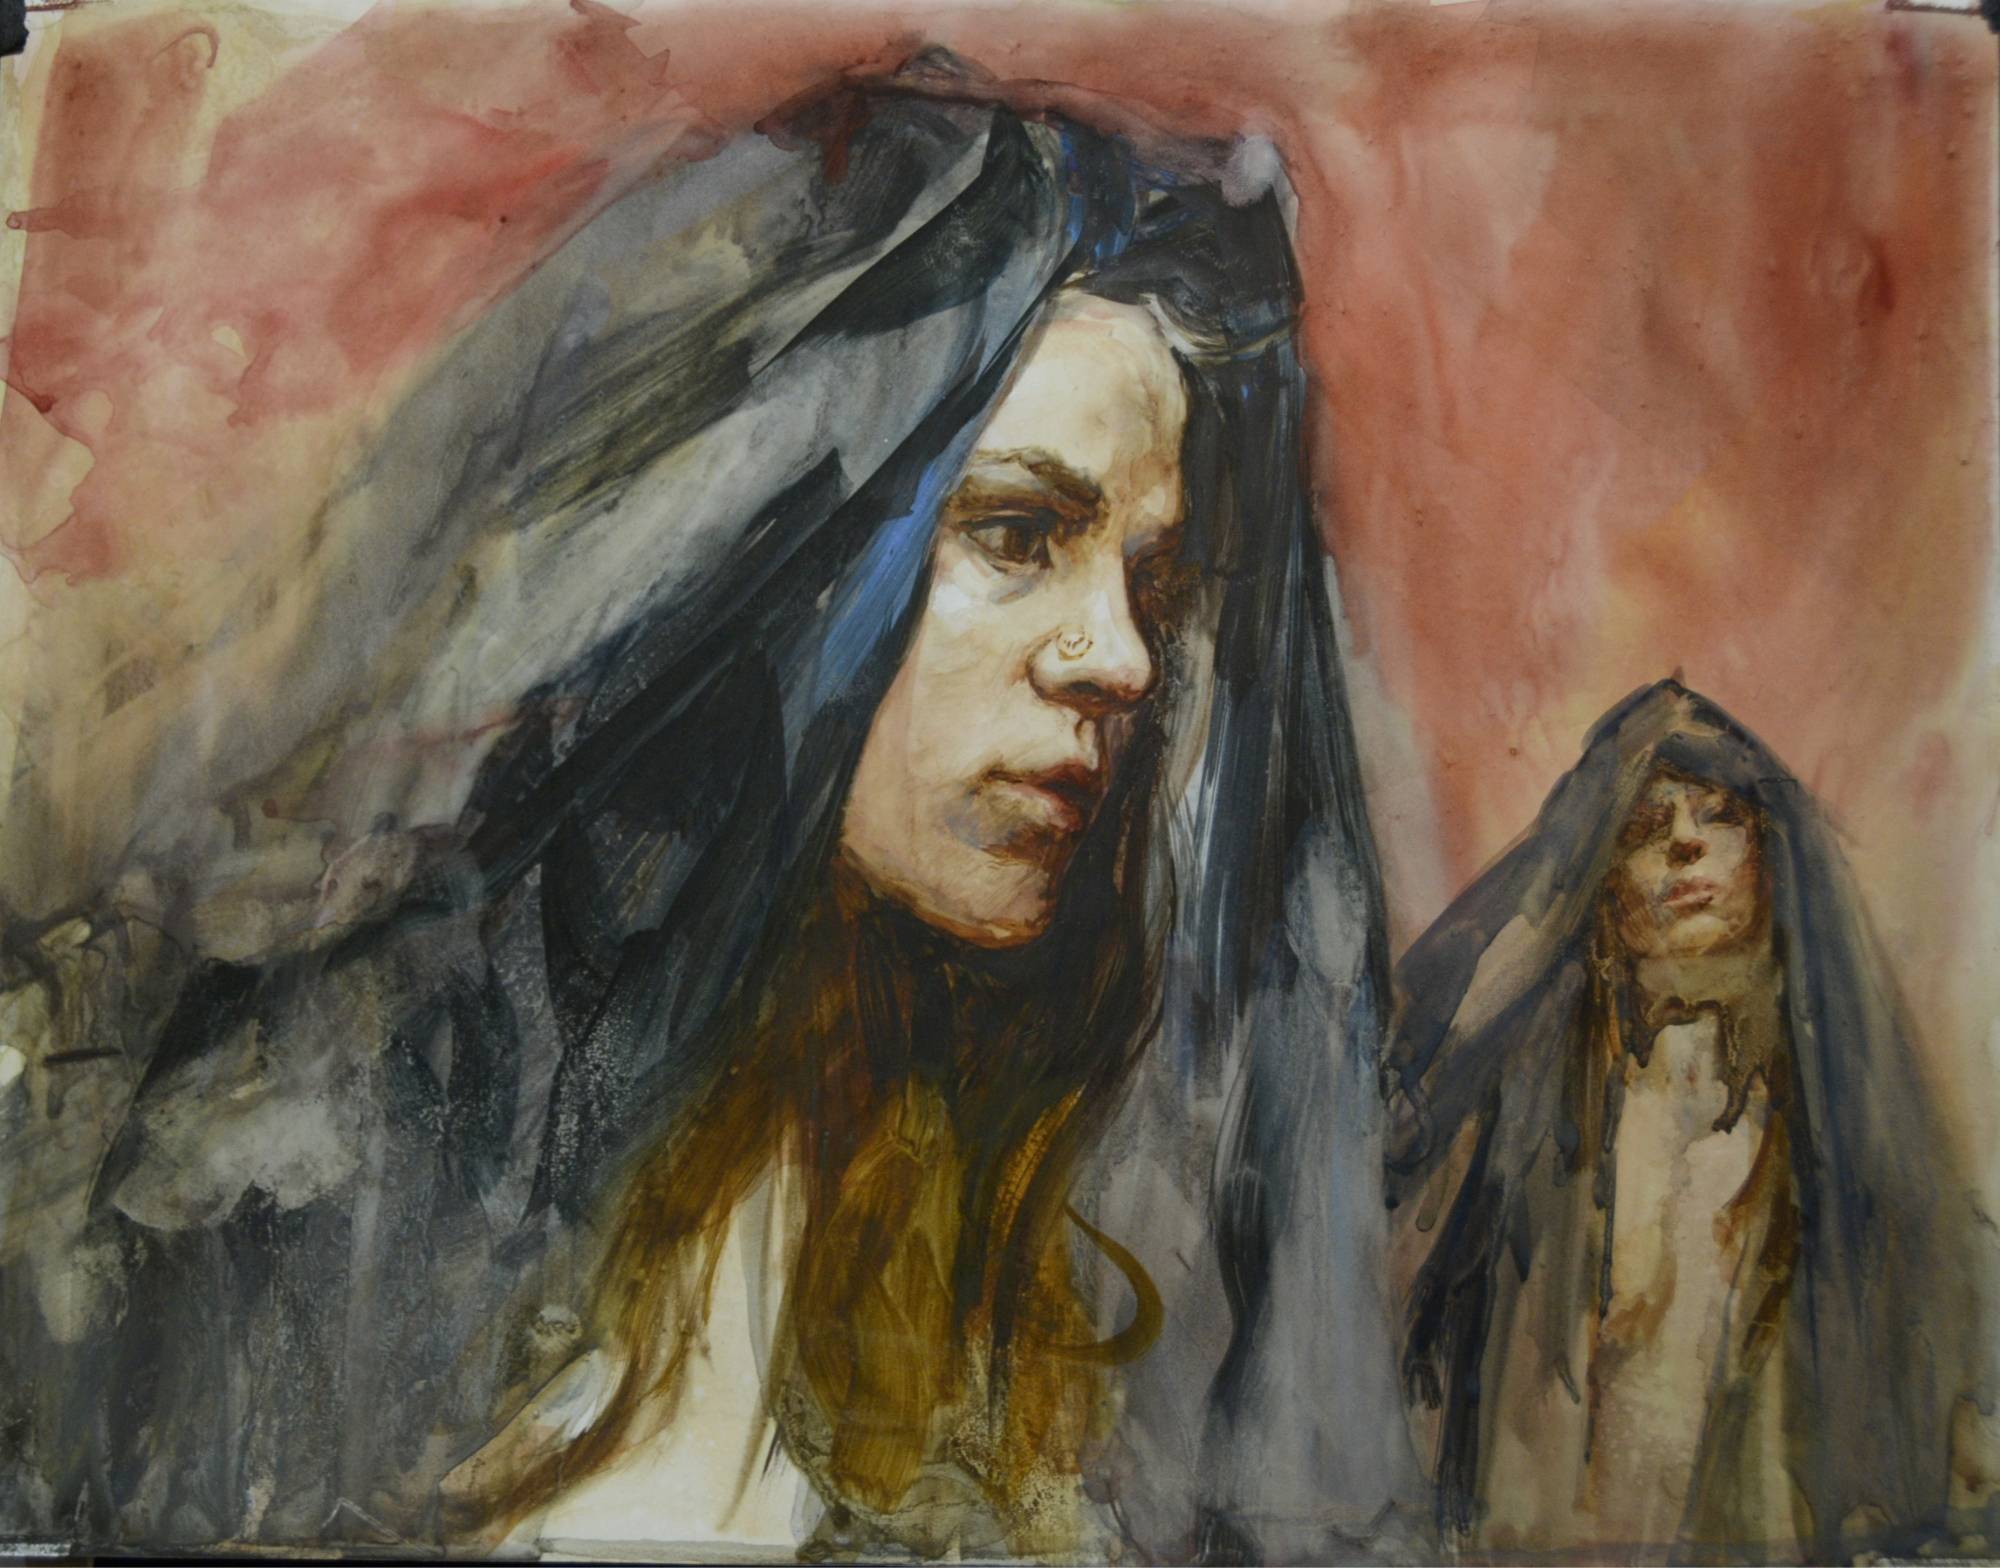 watercolor painting showing a close up portrait of a figure wearing a robe with head covering in the foreground with second robed figure in background